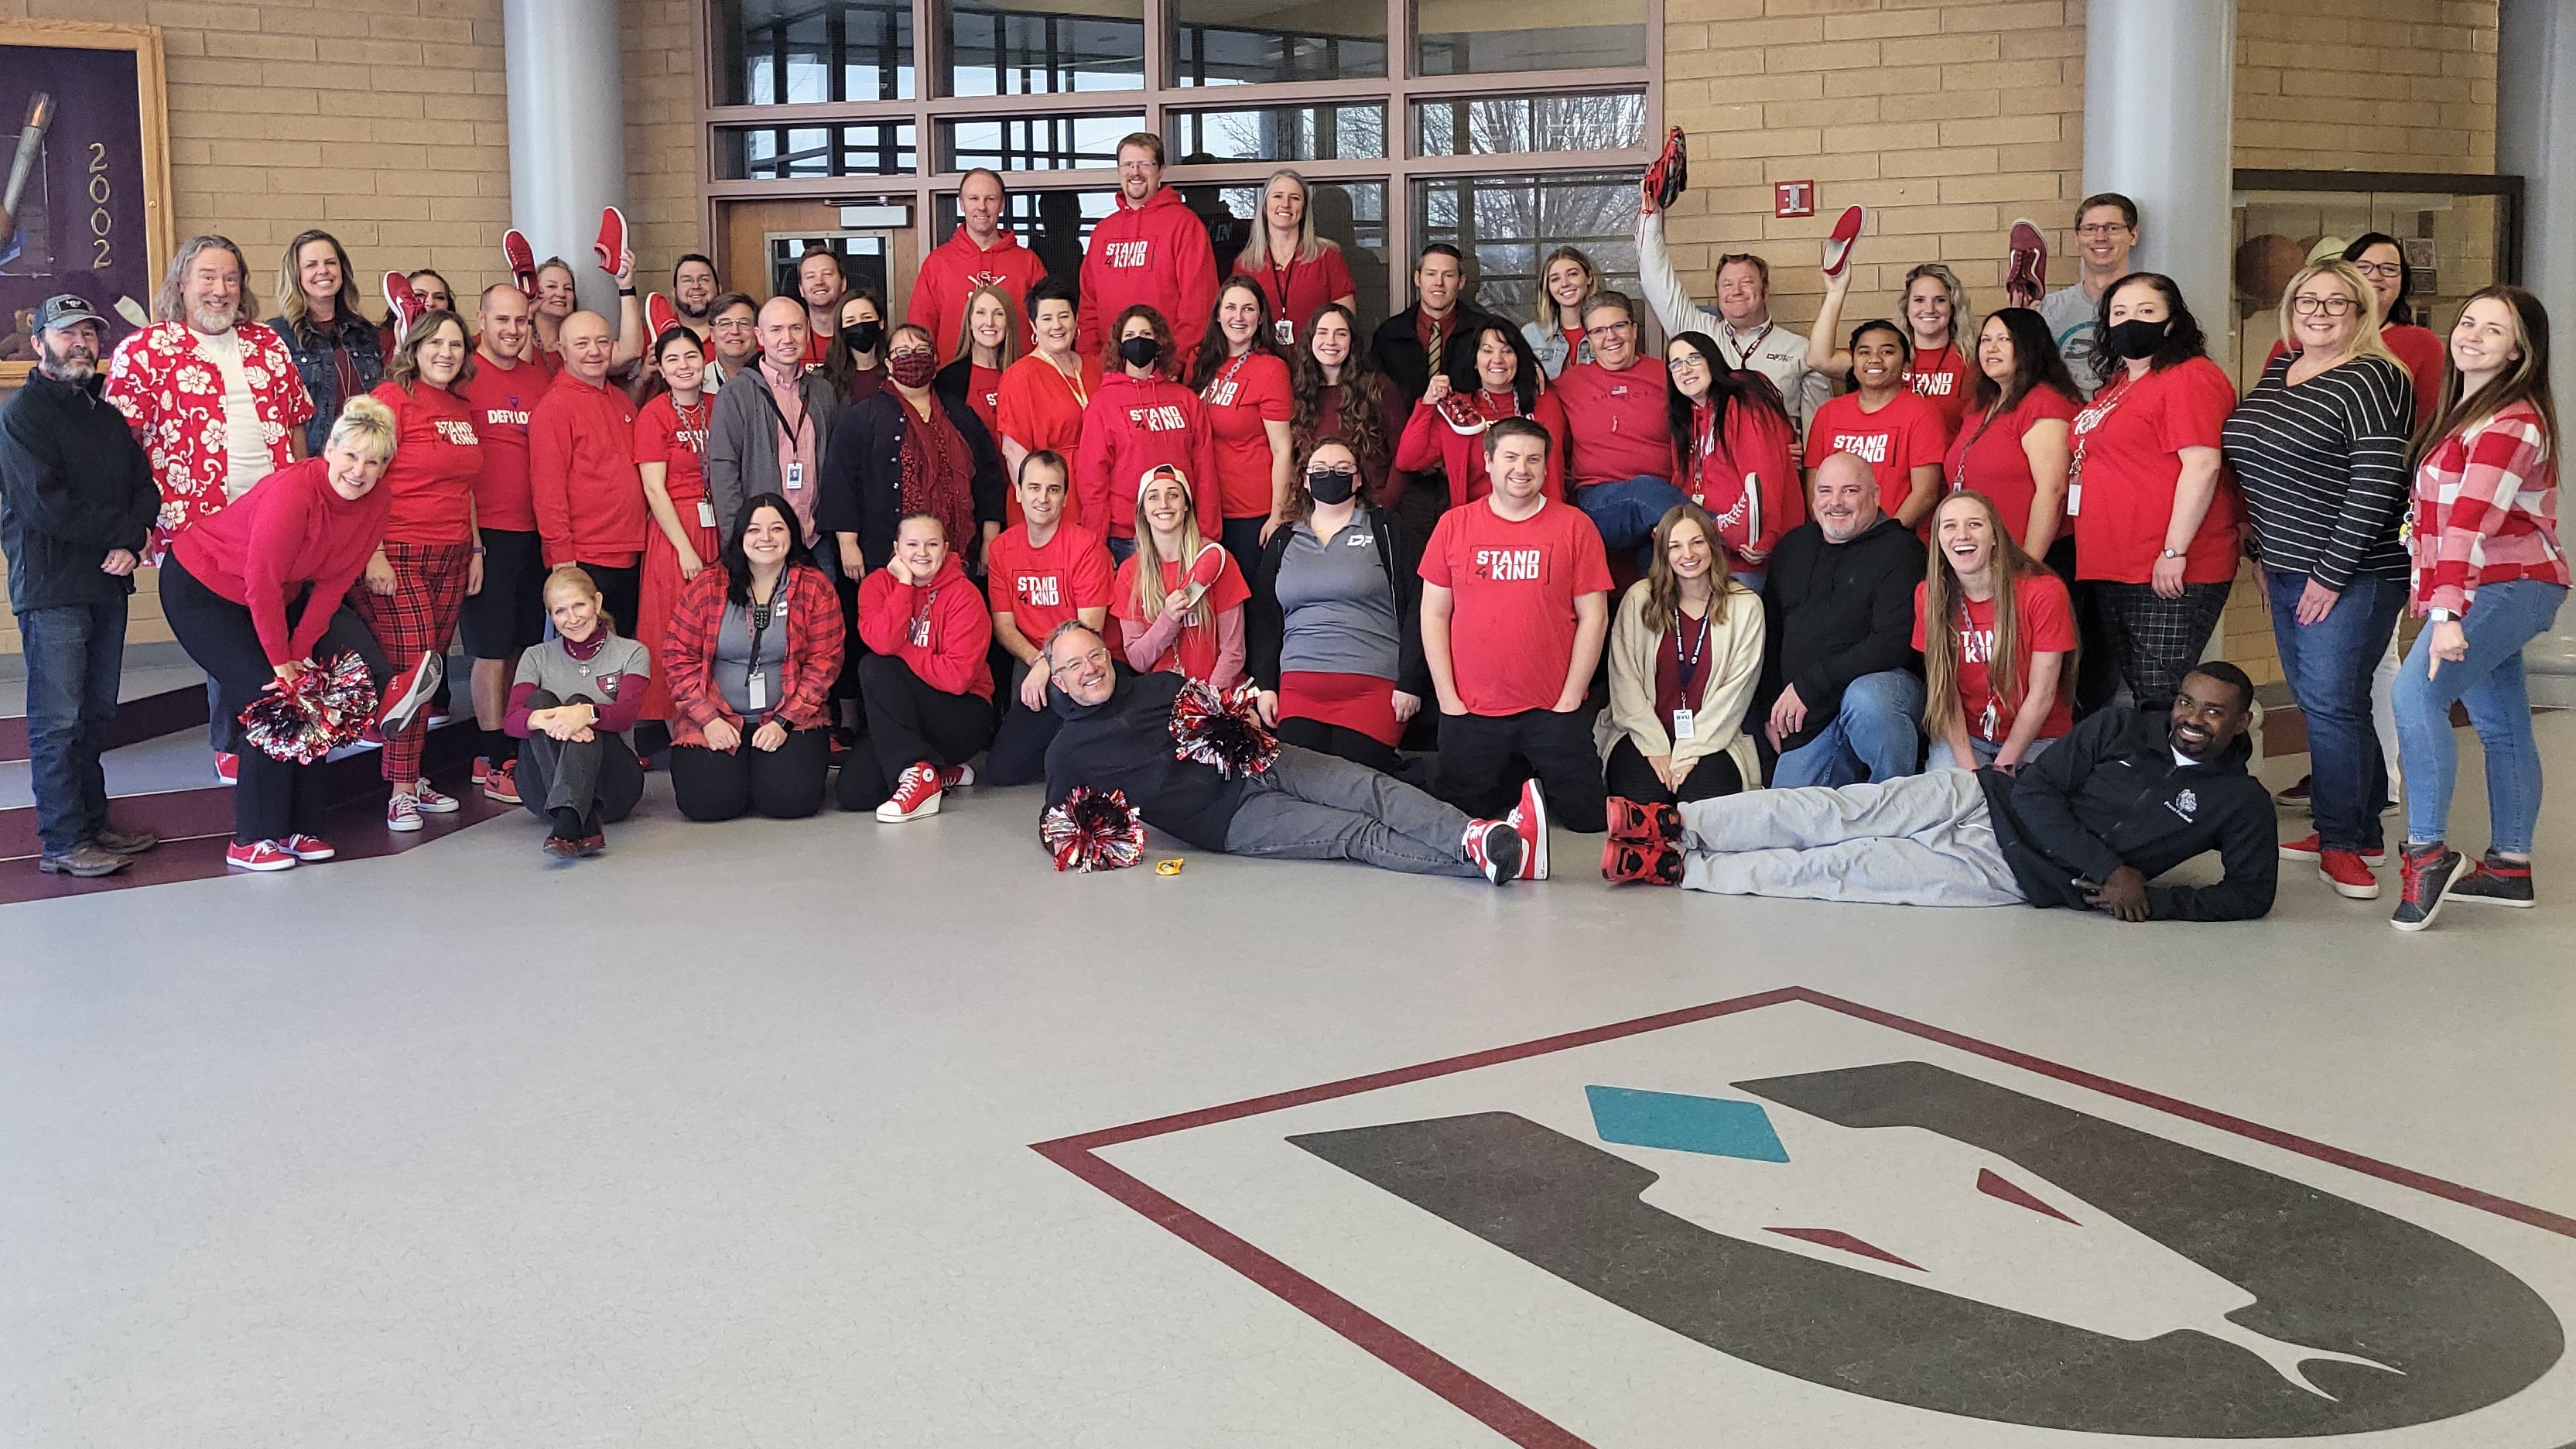 DFMS Faculty wearing red.